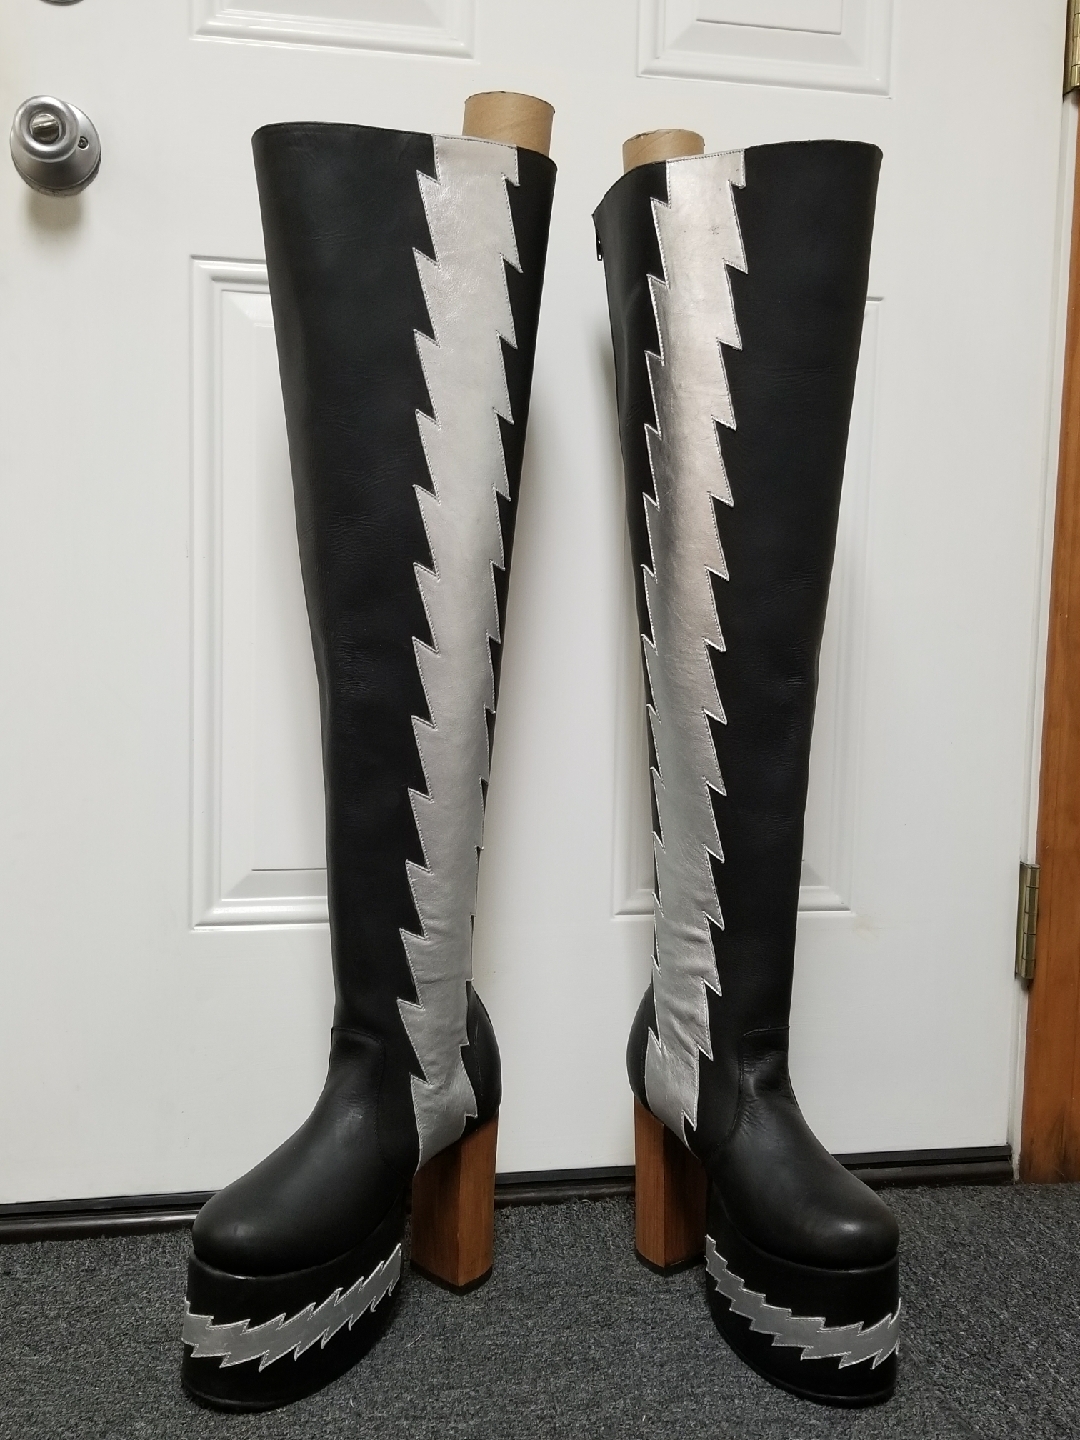 KISS COSTUMES & BOOTS